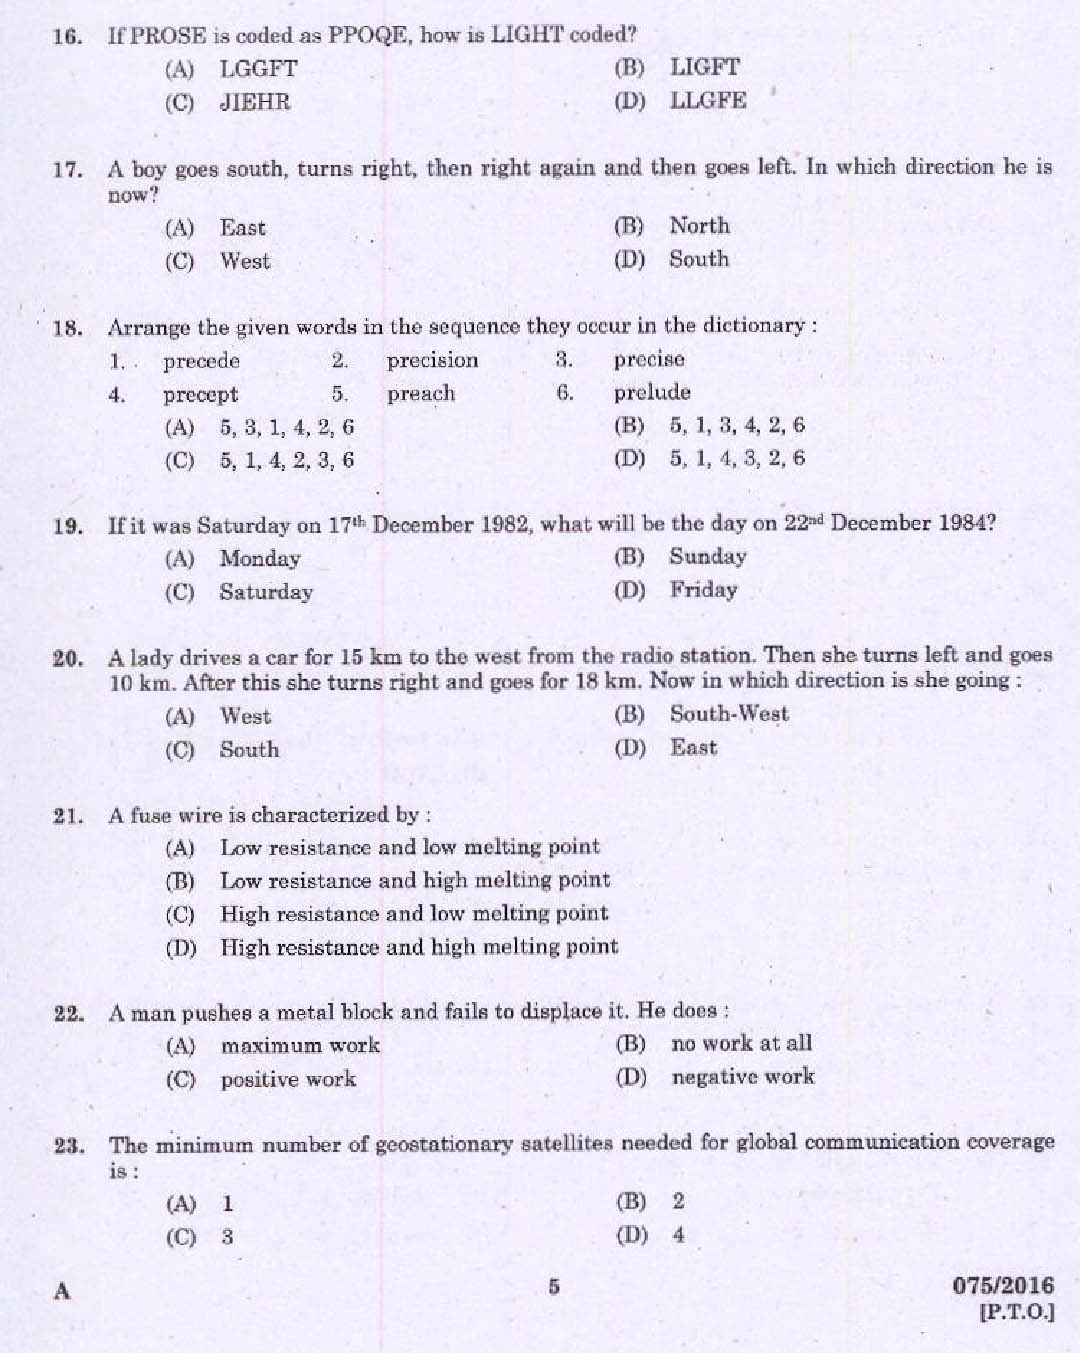 Kerala PSC Sub Inspector of Police Exam Question Code 0752016 3